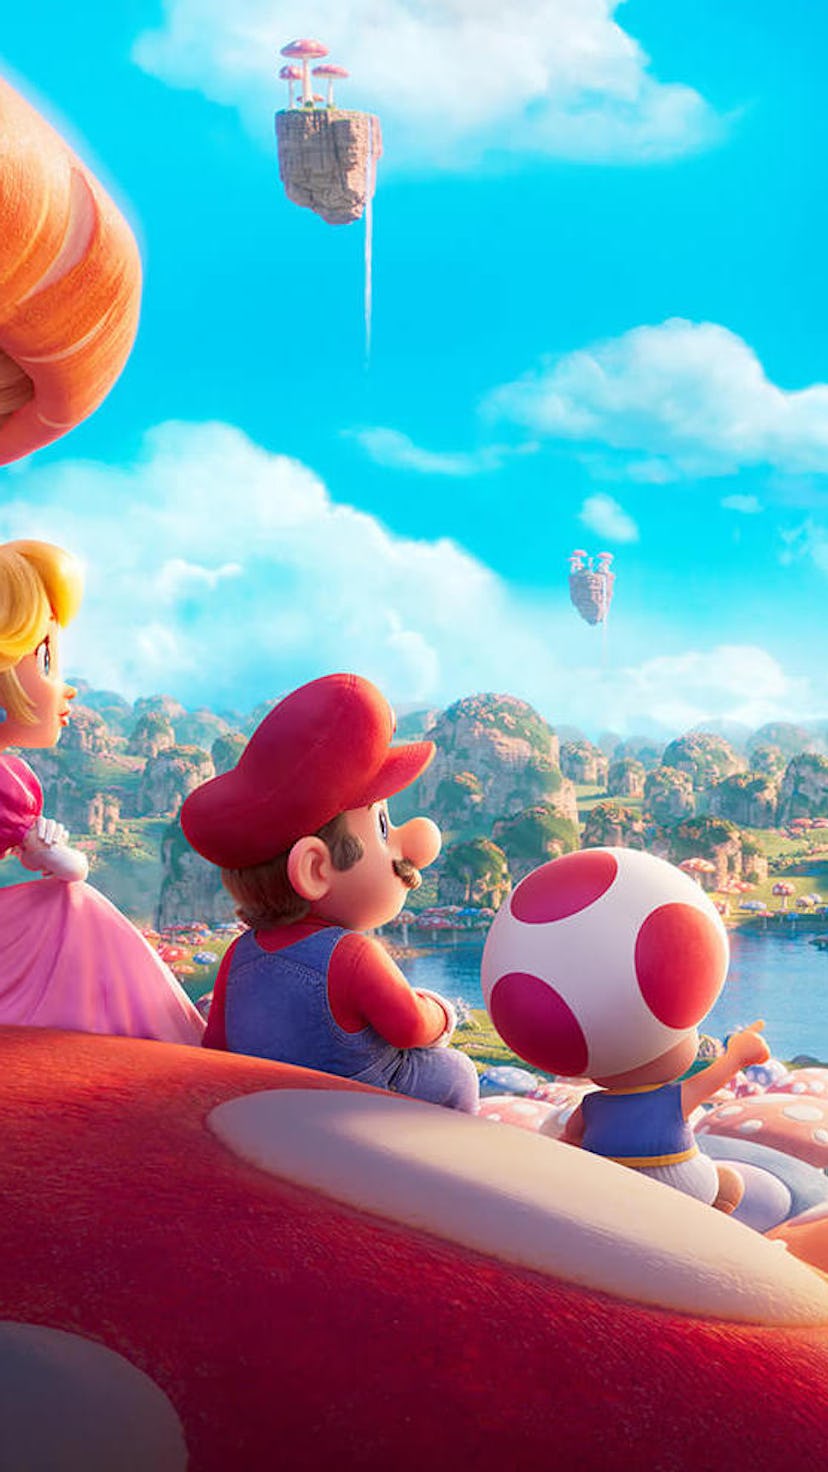 A new animated film based on the world of Super Mario Bros. is coming to theaters on April 5. 